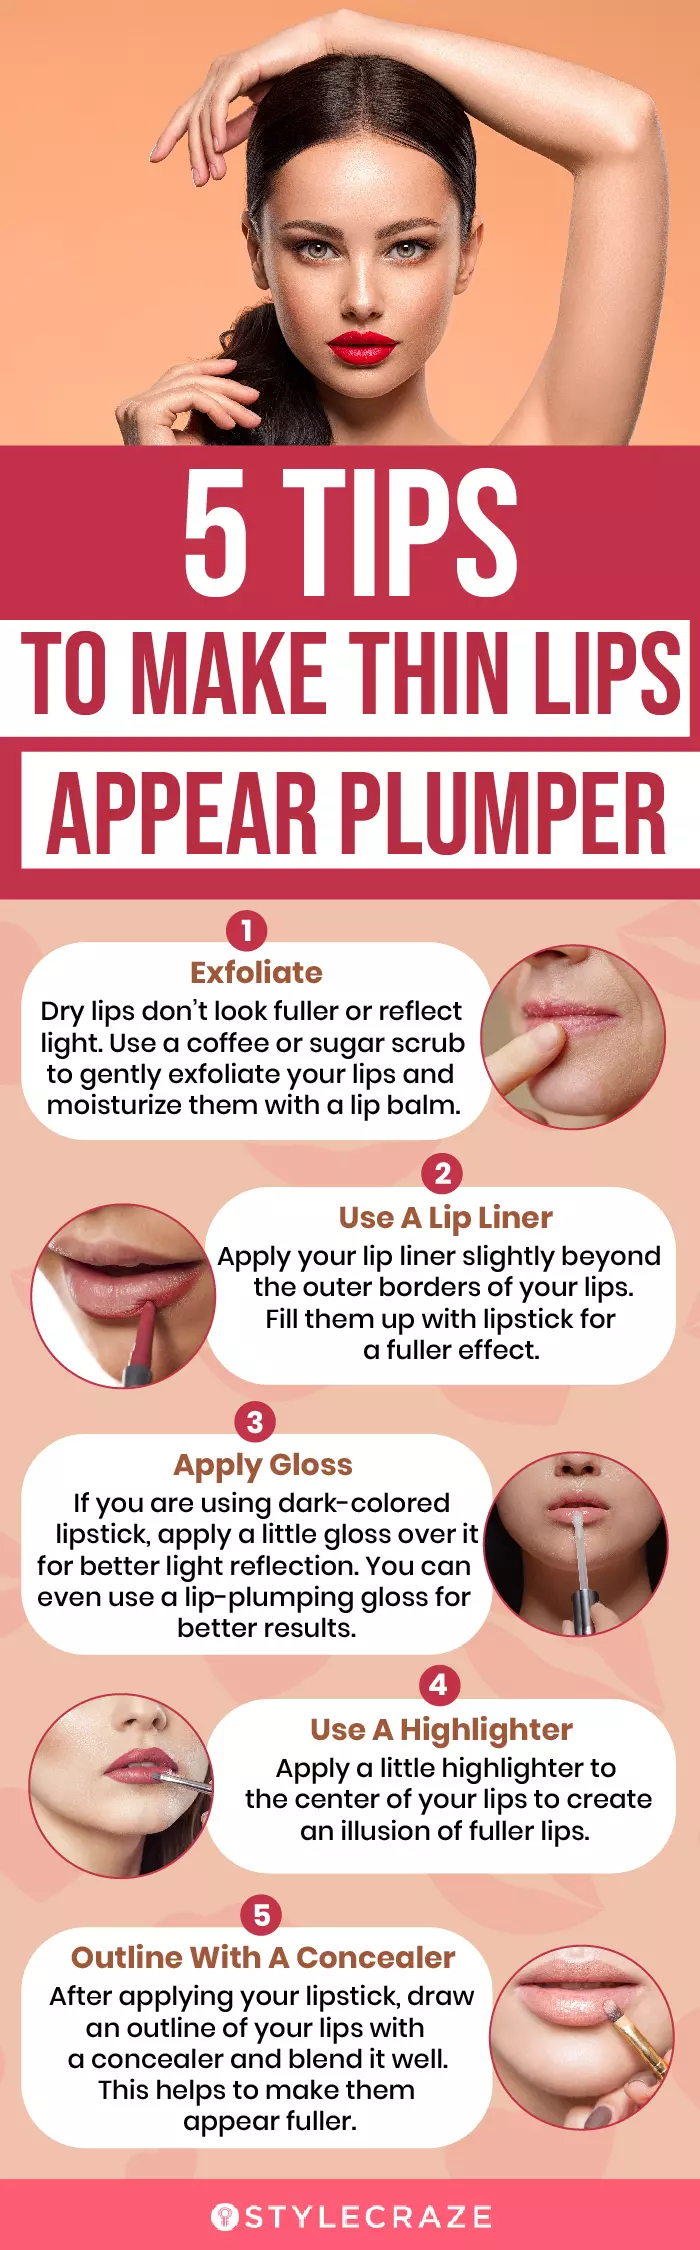 5 Tips To Make Thin Lips Appear Plumper (infographic)